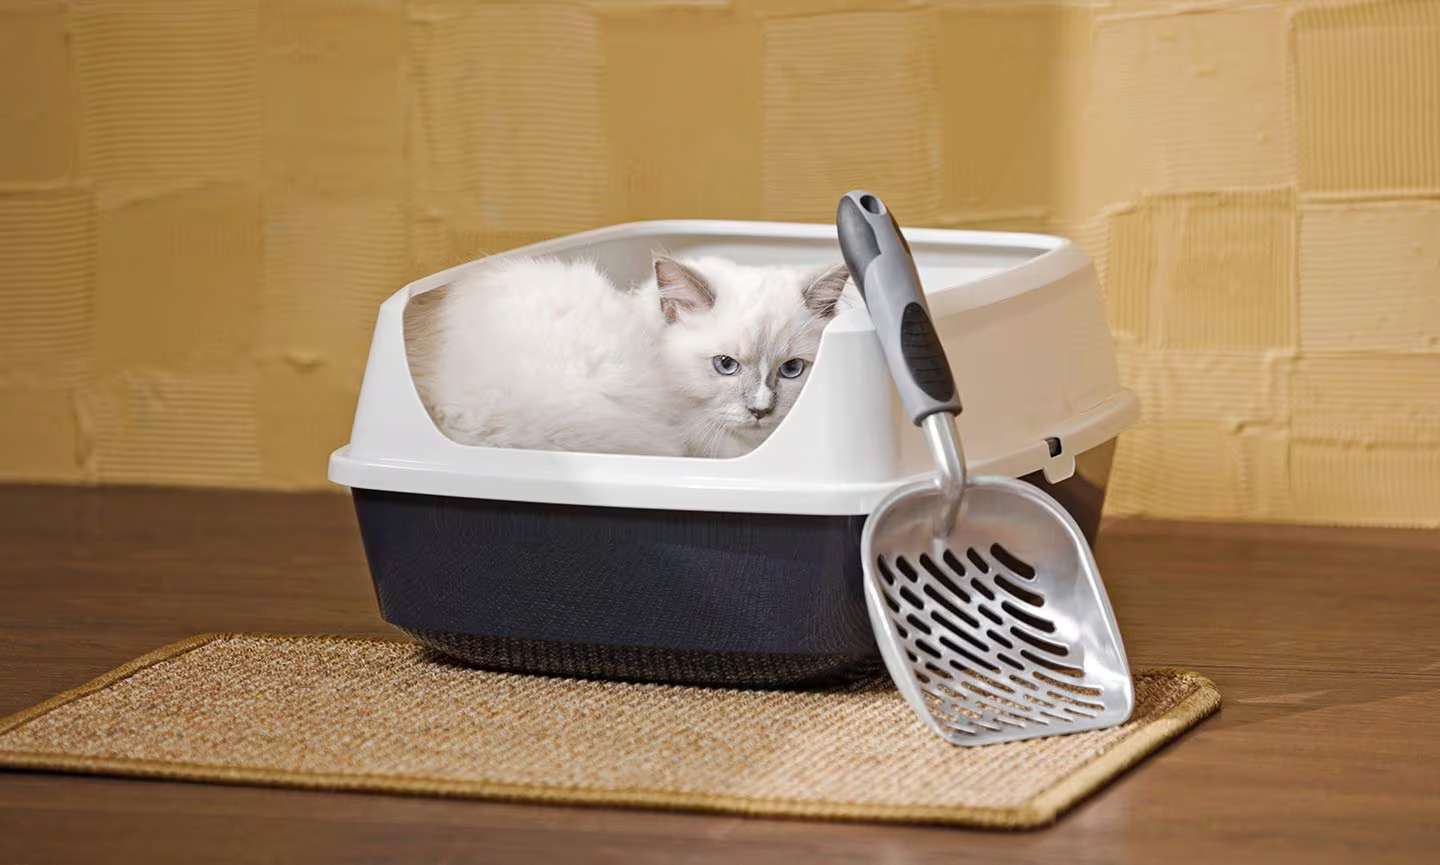 How To Teach A Cat To Use A Litter Box